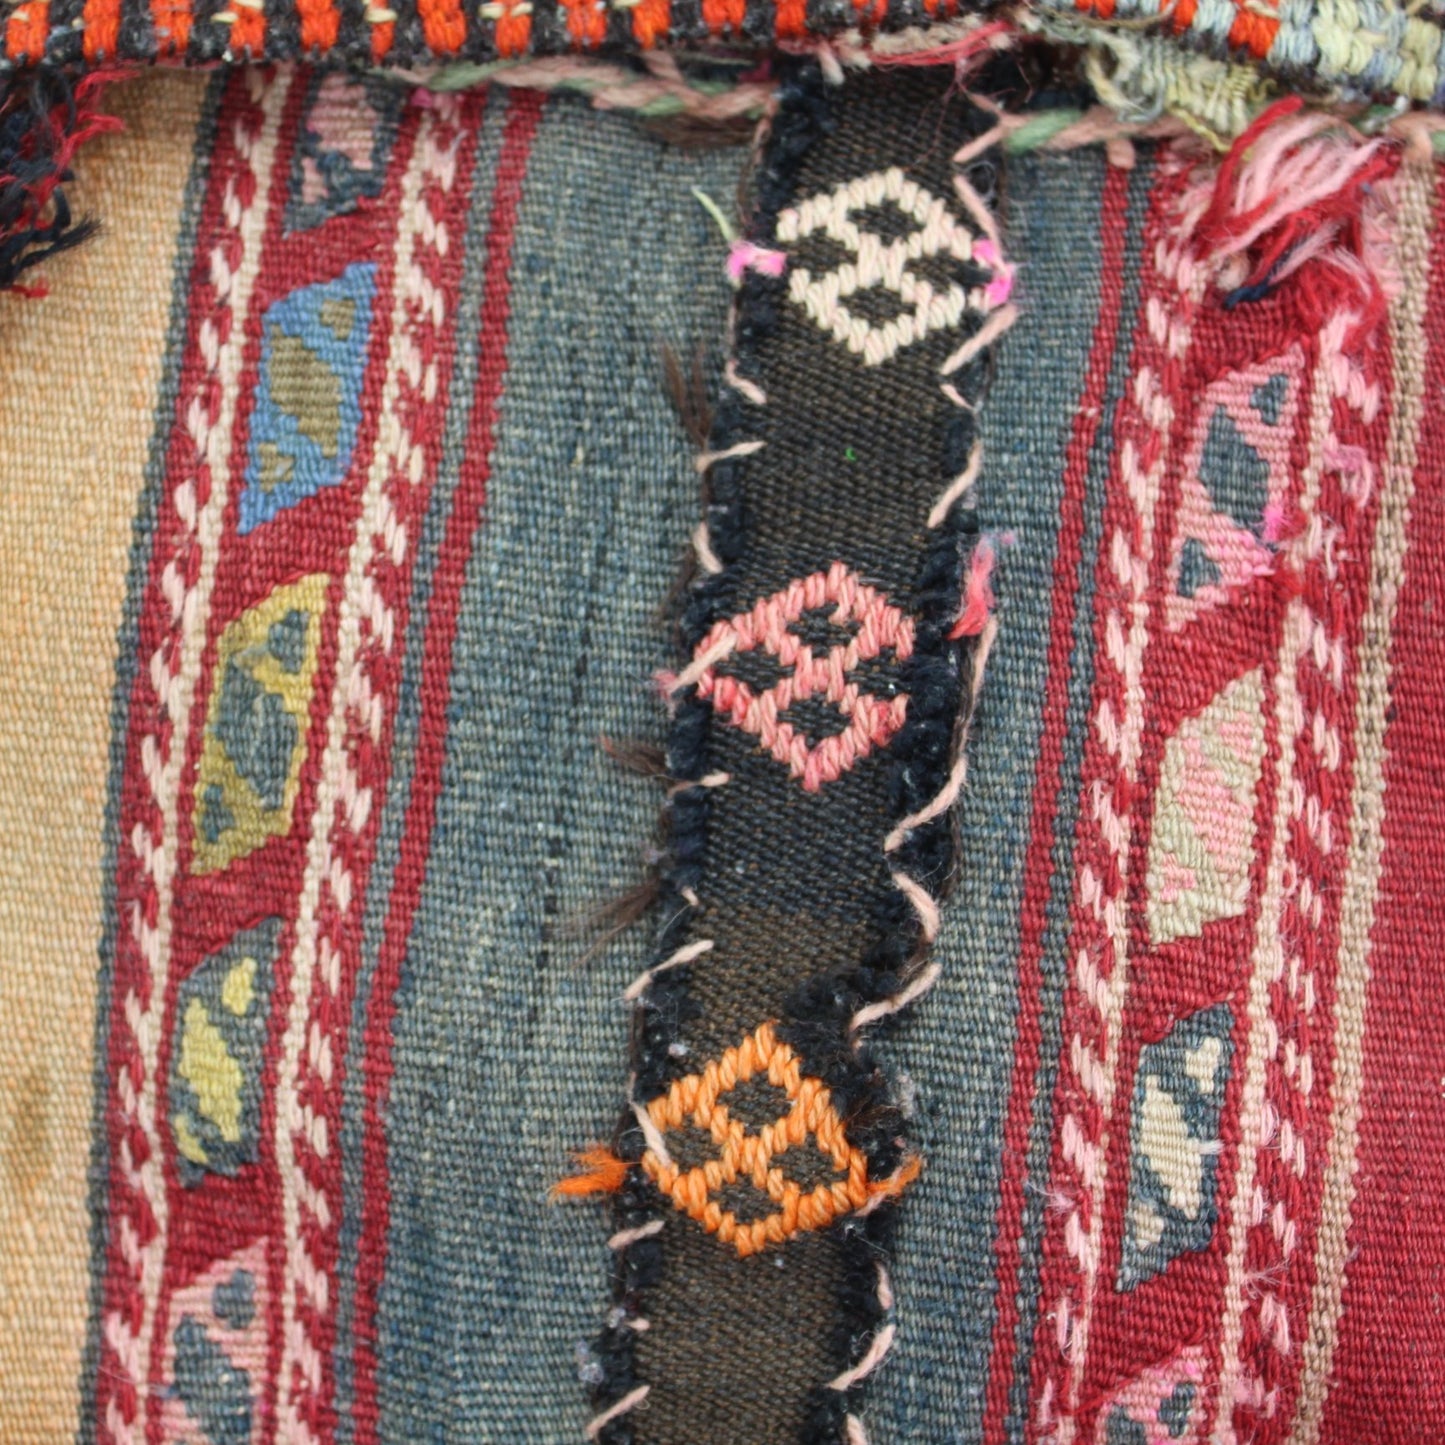 Old Camel Saddle Bag Kilim Hand Woven Used Shabby Authentic Decor Item woven work closseup